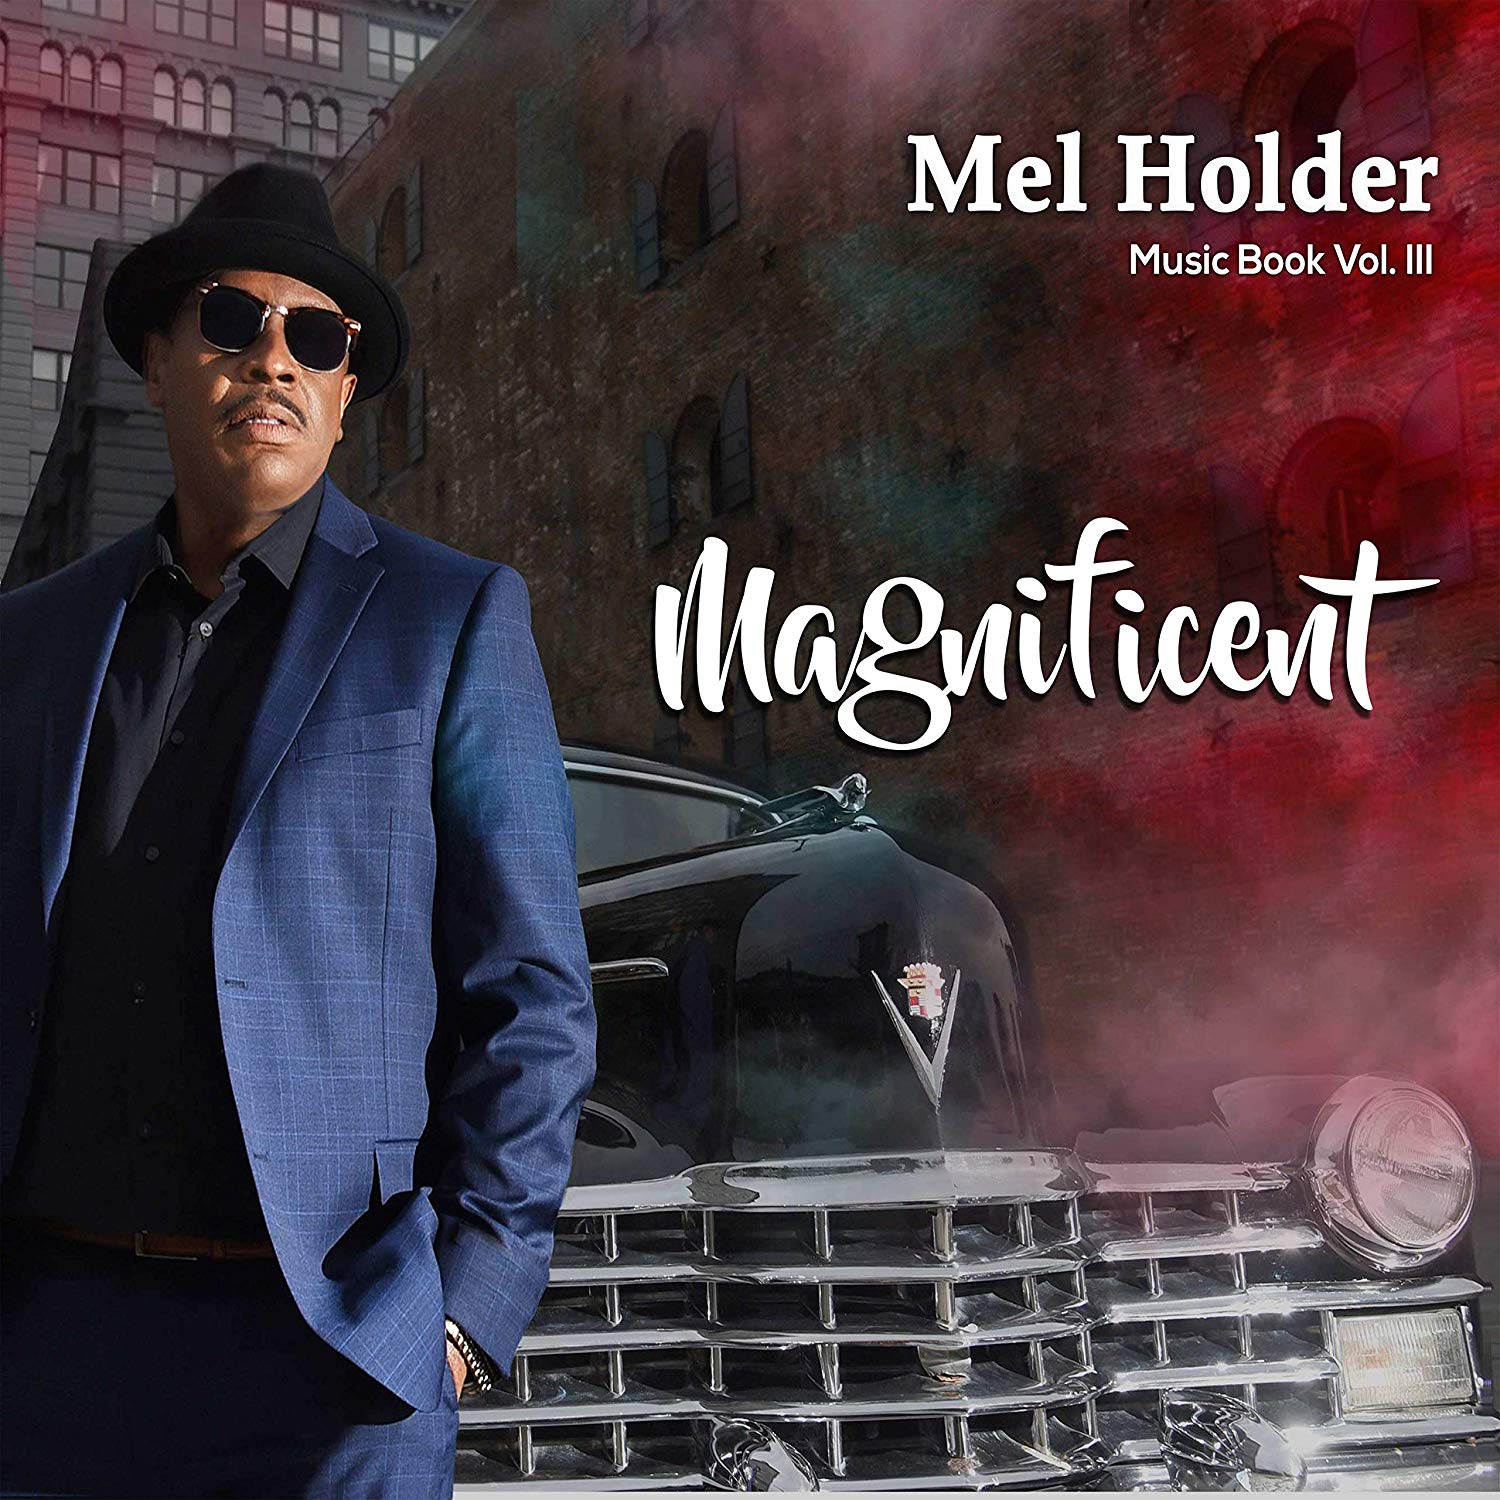 MEL HOLDER - Music Book Volume III - Magnificent cover 